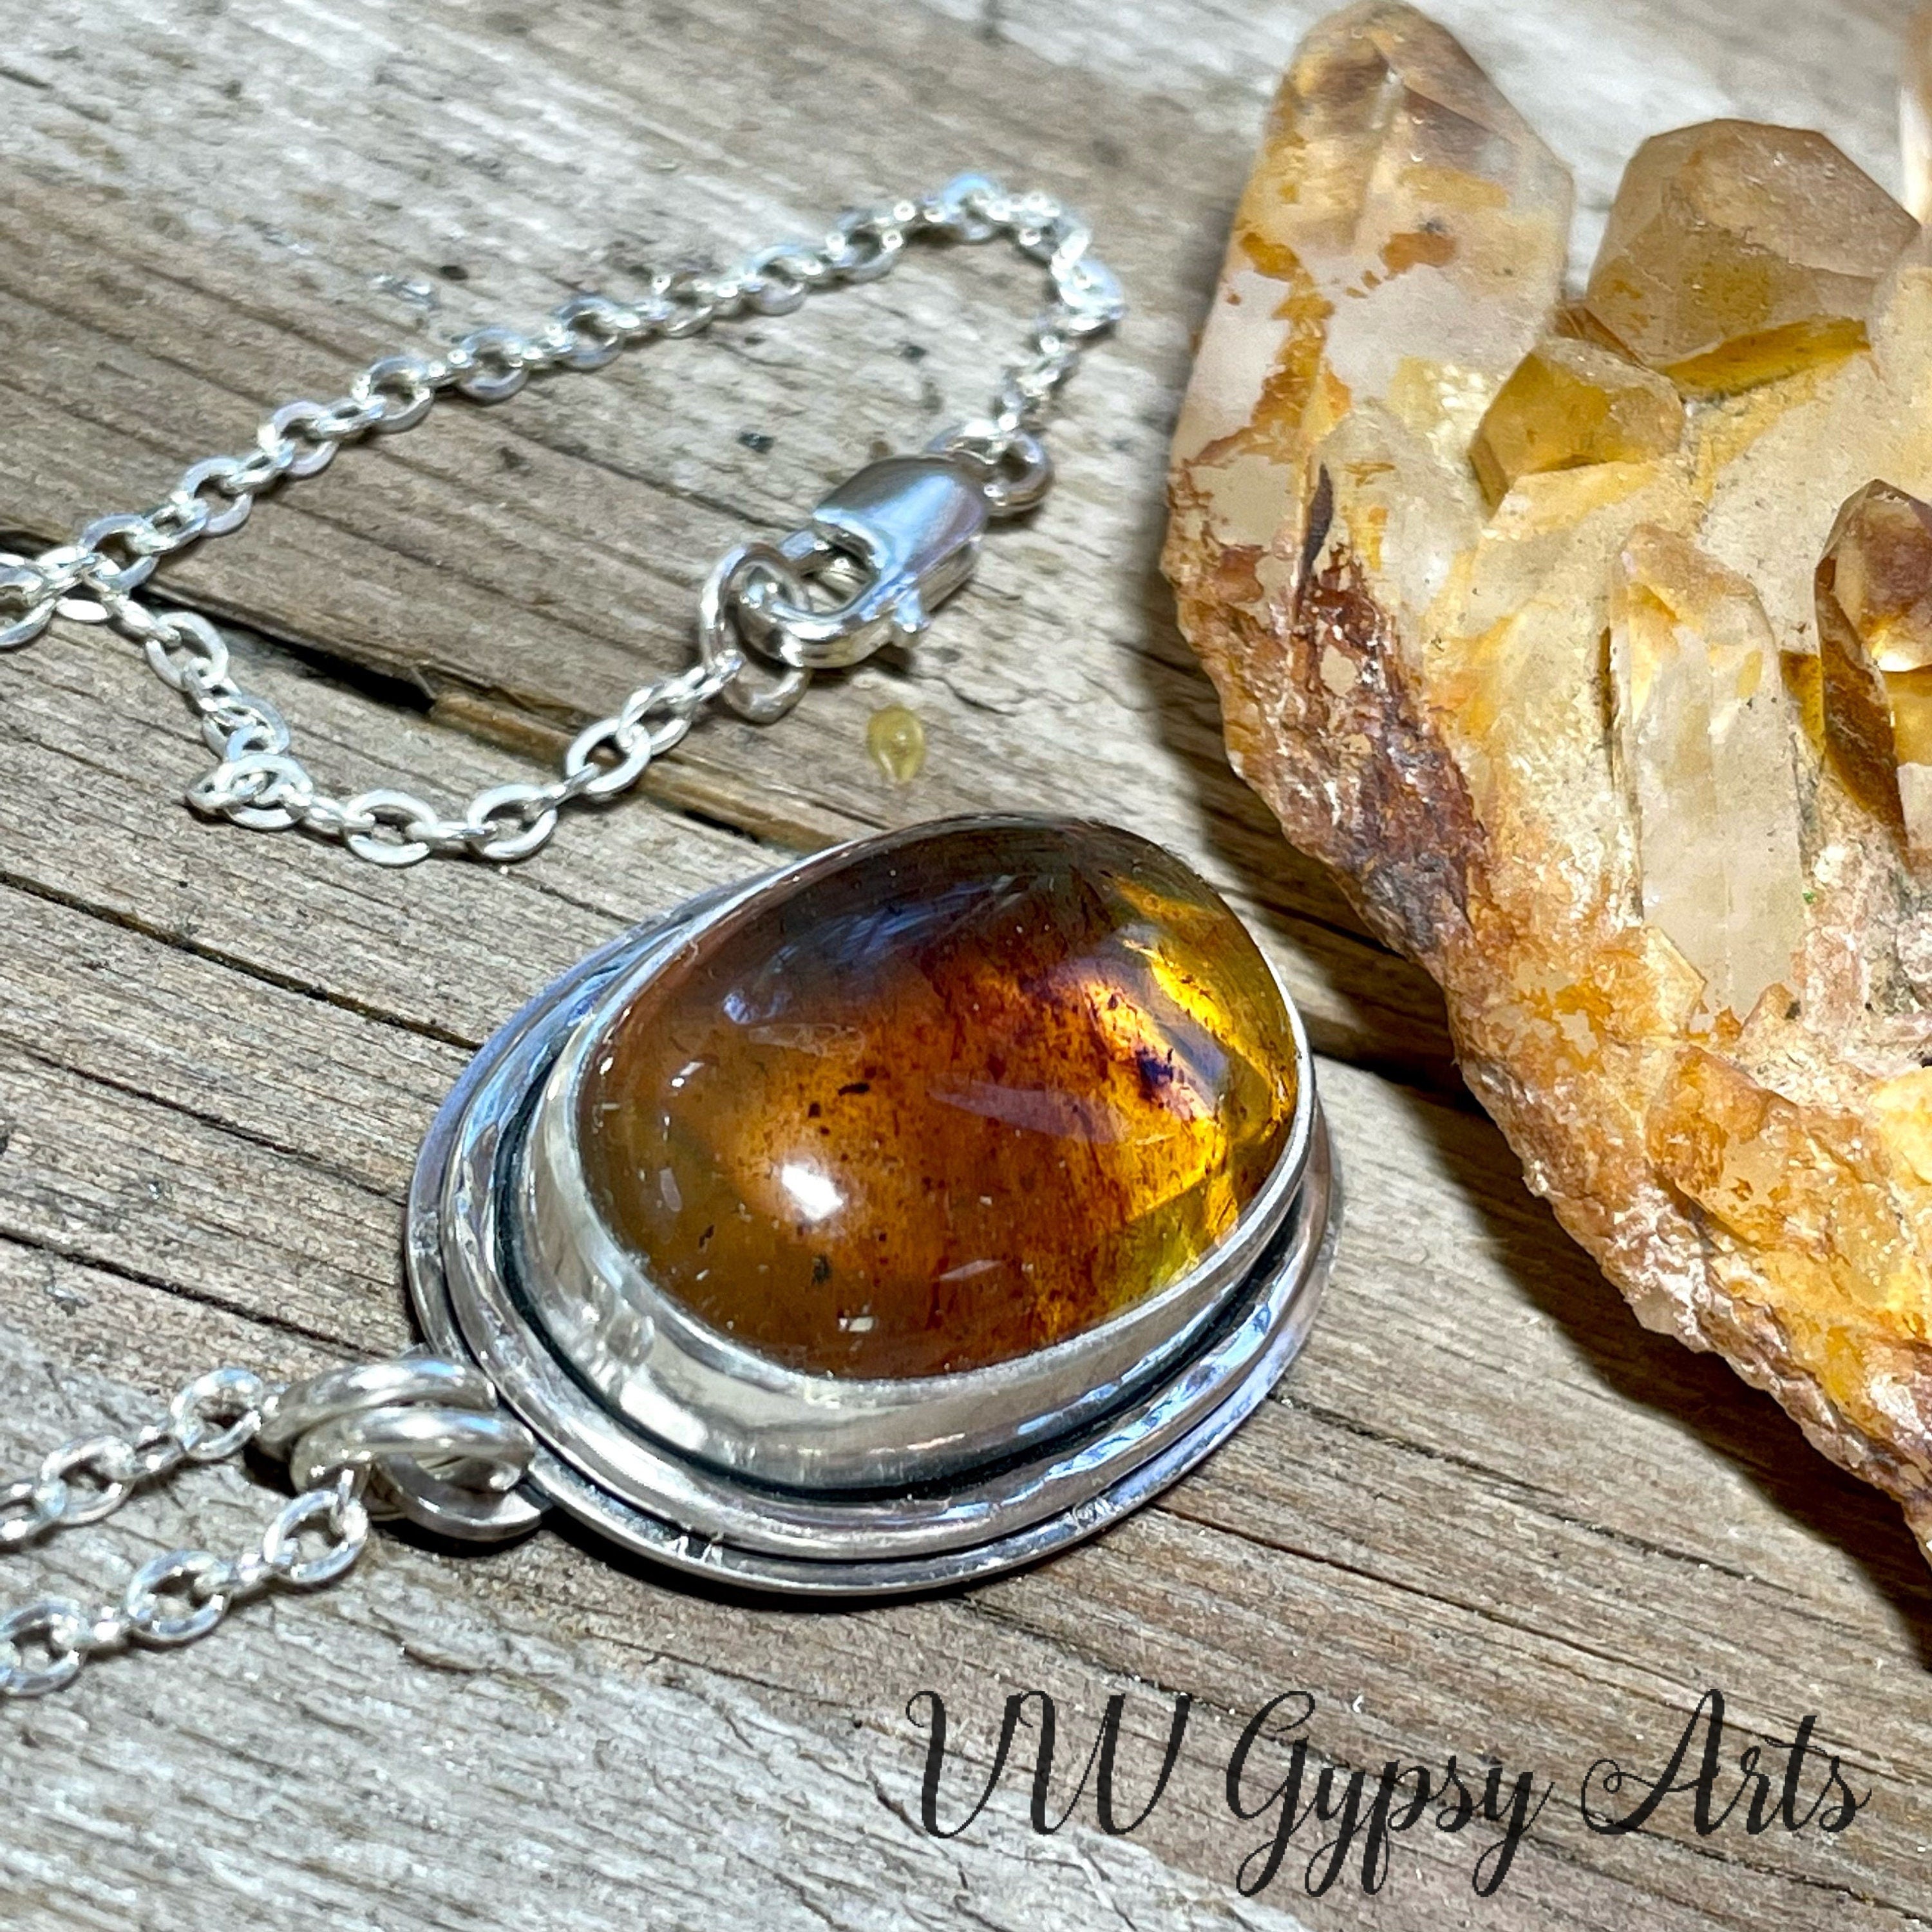 Rare Amber Pendant With Petrified Insect | Crystalshop